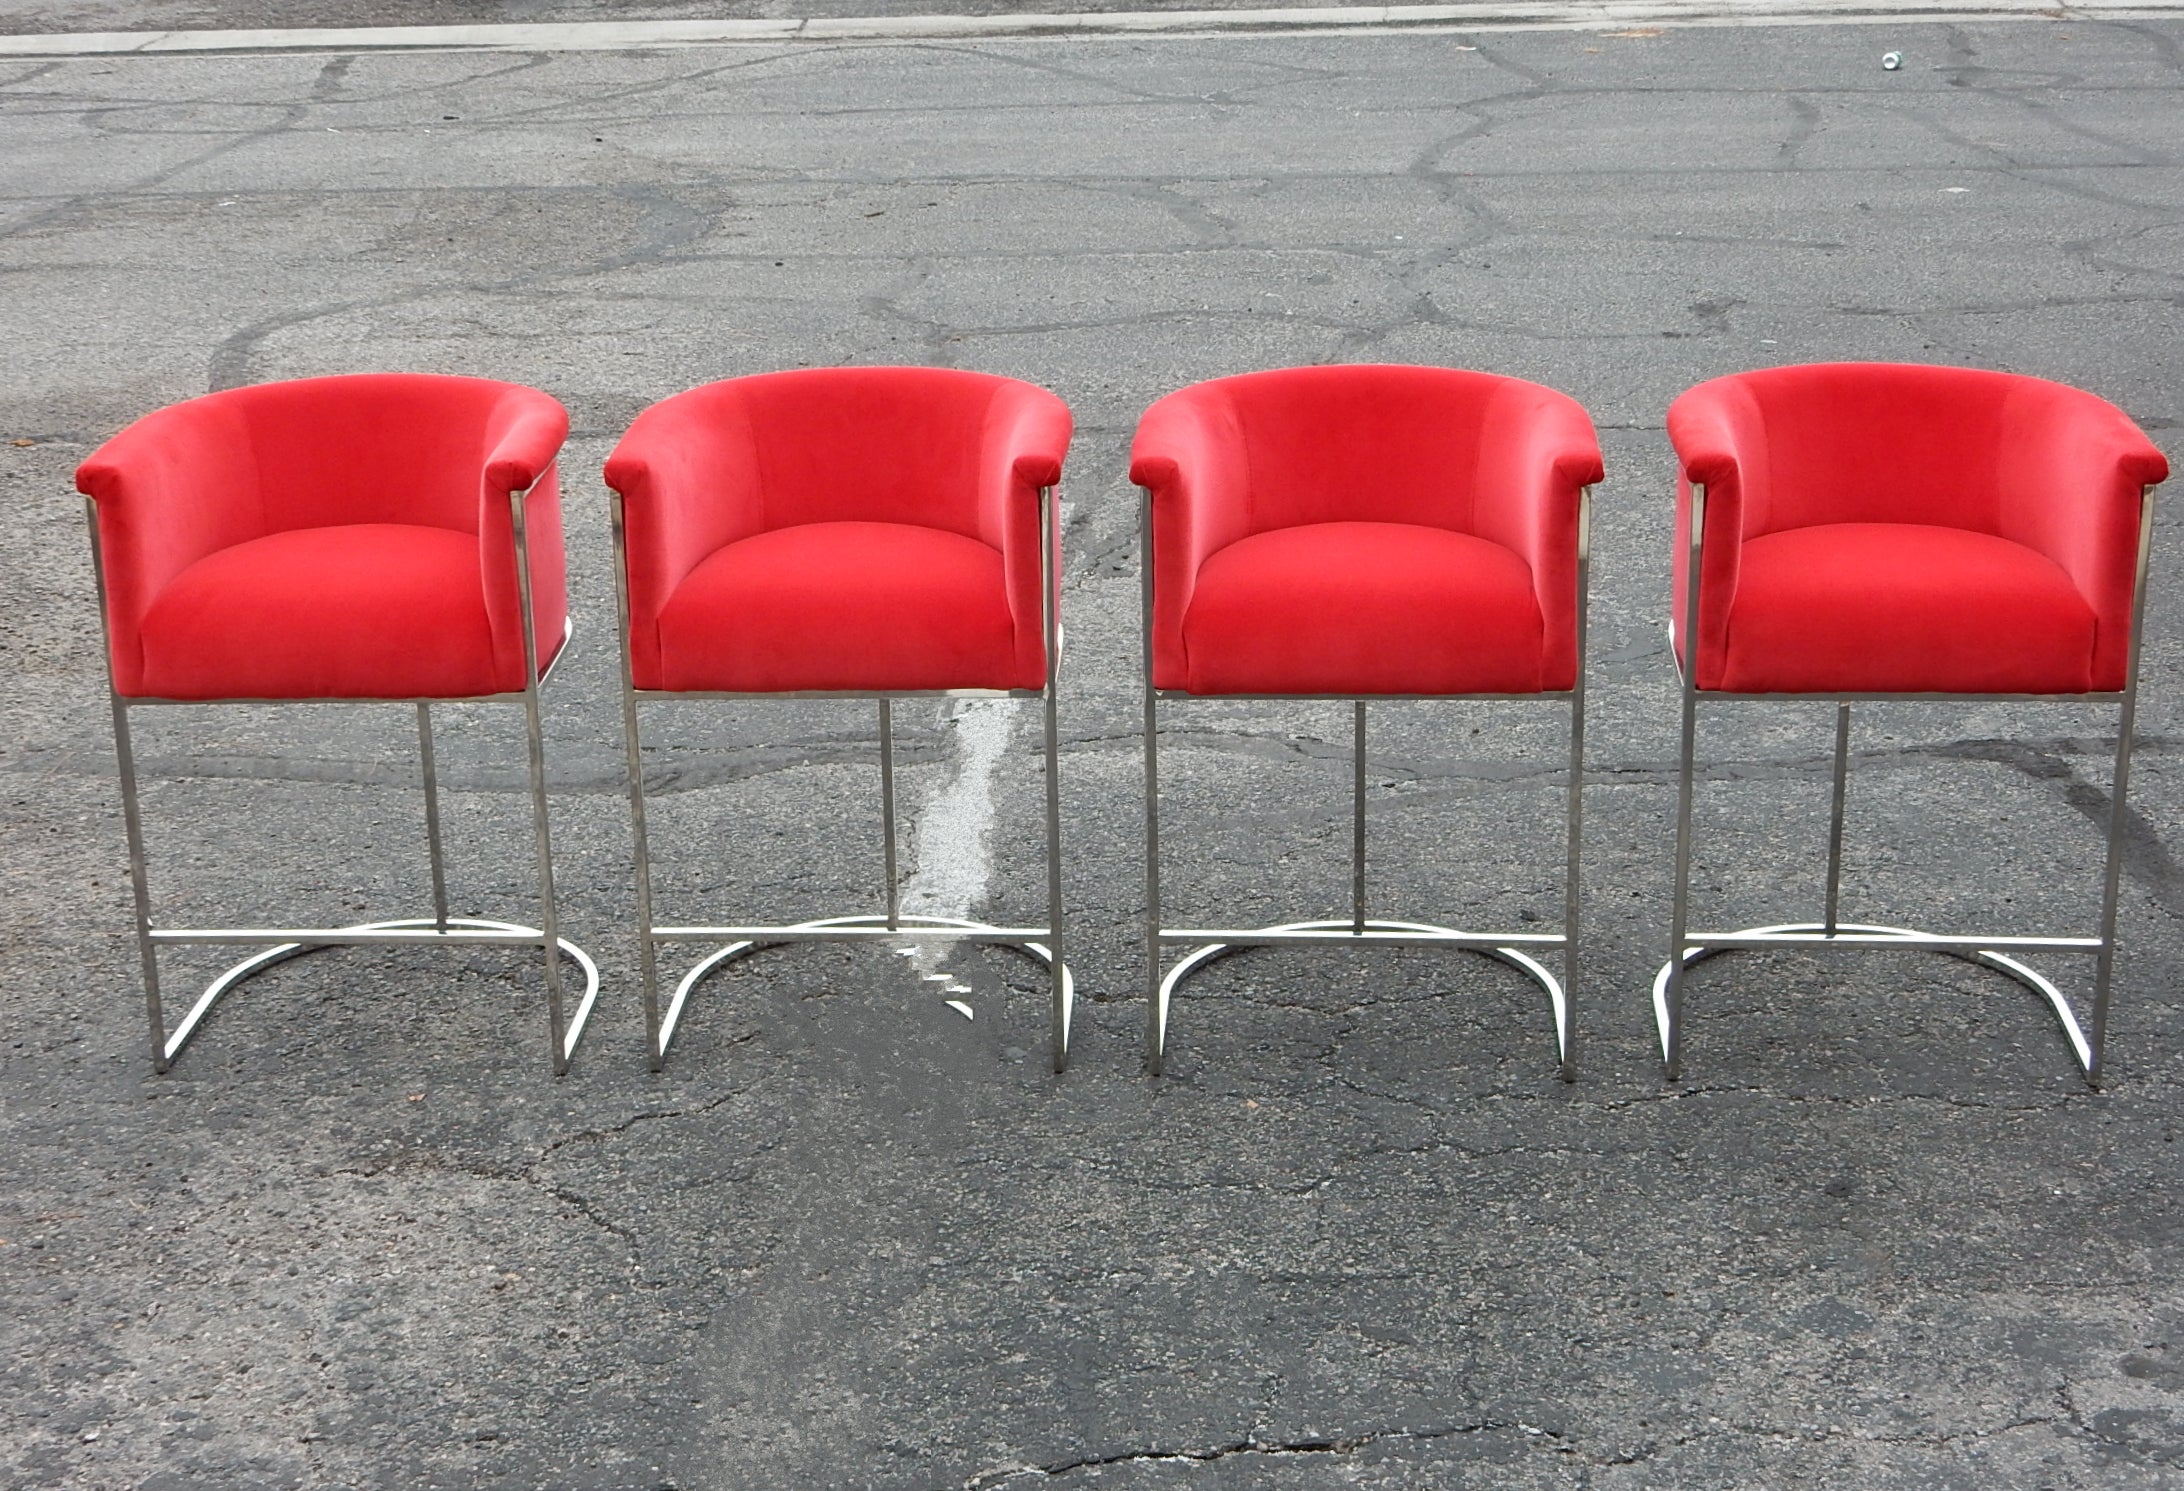 Set of 4 chrome bar stools from the 1970's.
Seamless thin square tube frames with a bucket seating area
upholstered in red velvet.
Tall, counter height standing 33in tall. 
Exceptional quality stools in lightly pre-owned condition. 
They are